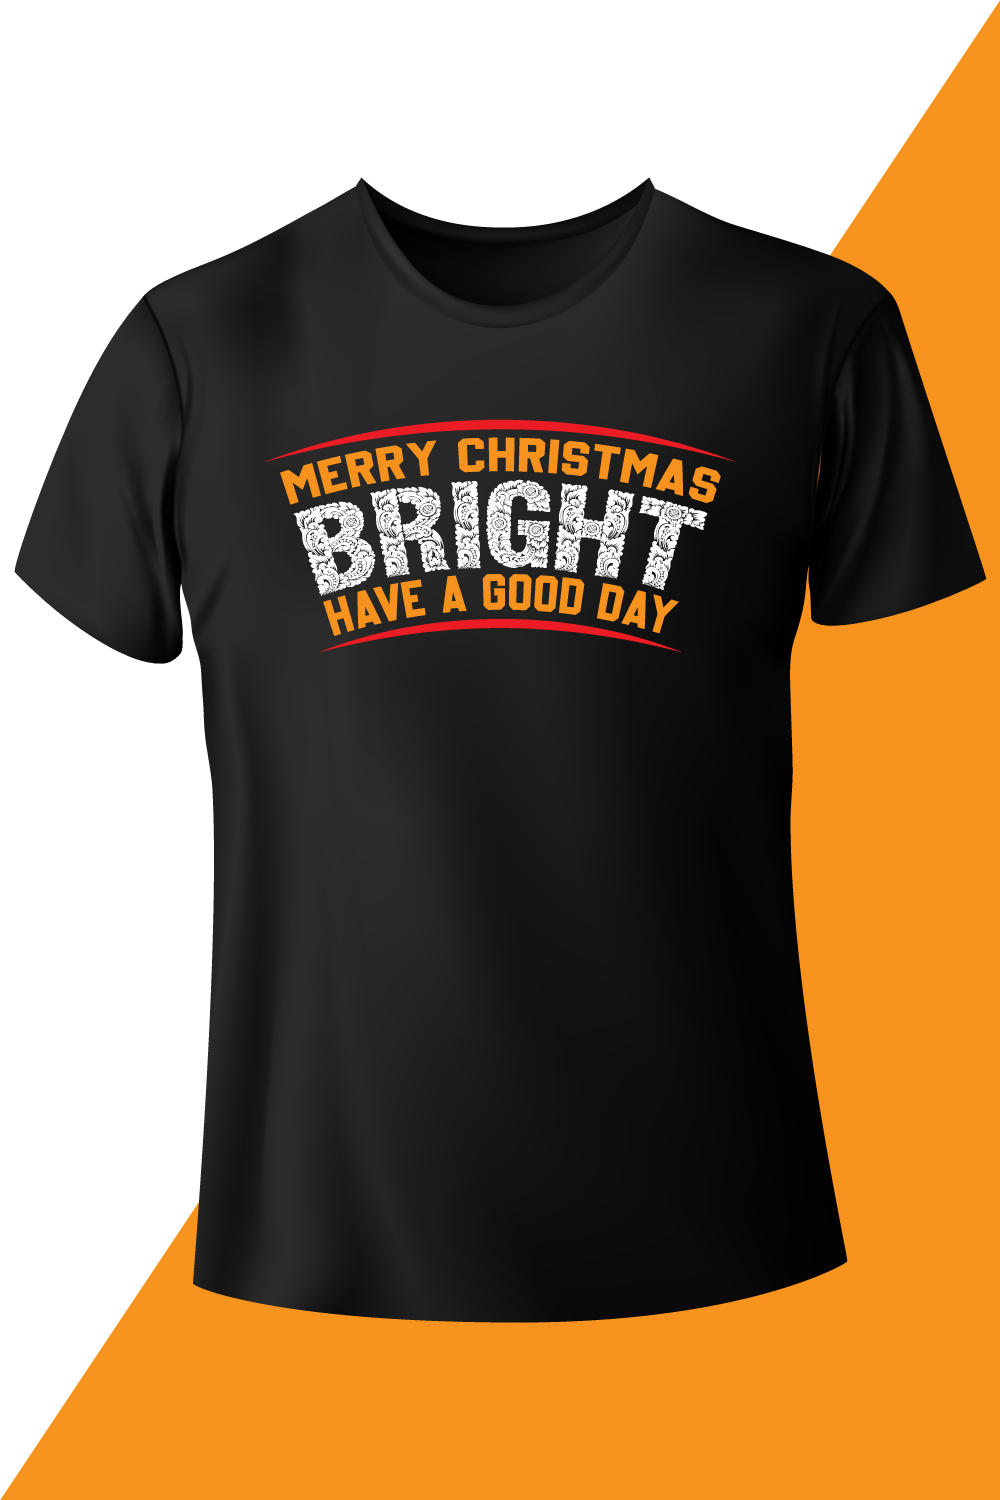 Image with a black T-shirt with a beautiful inscription merry christmas bright have a good day.